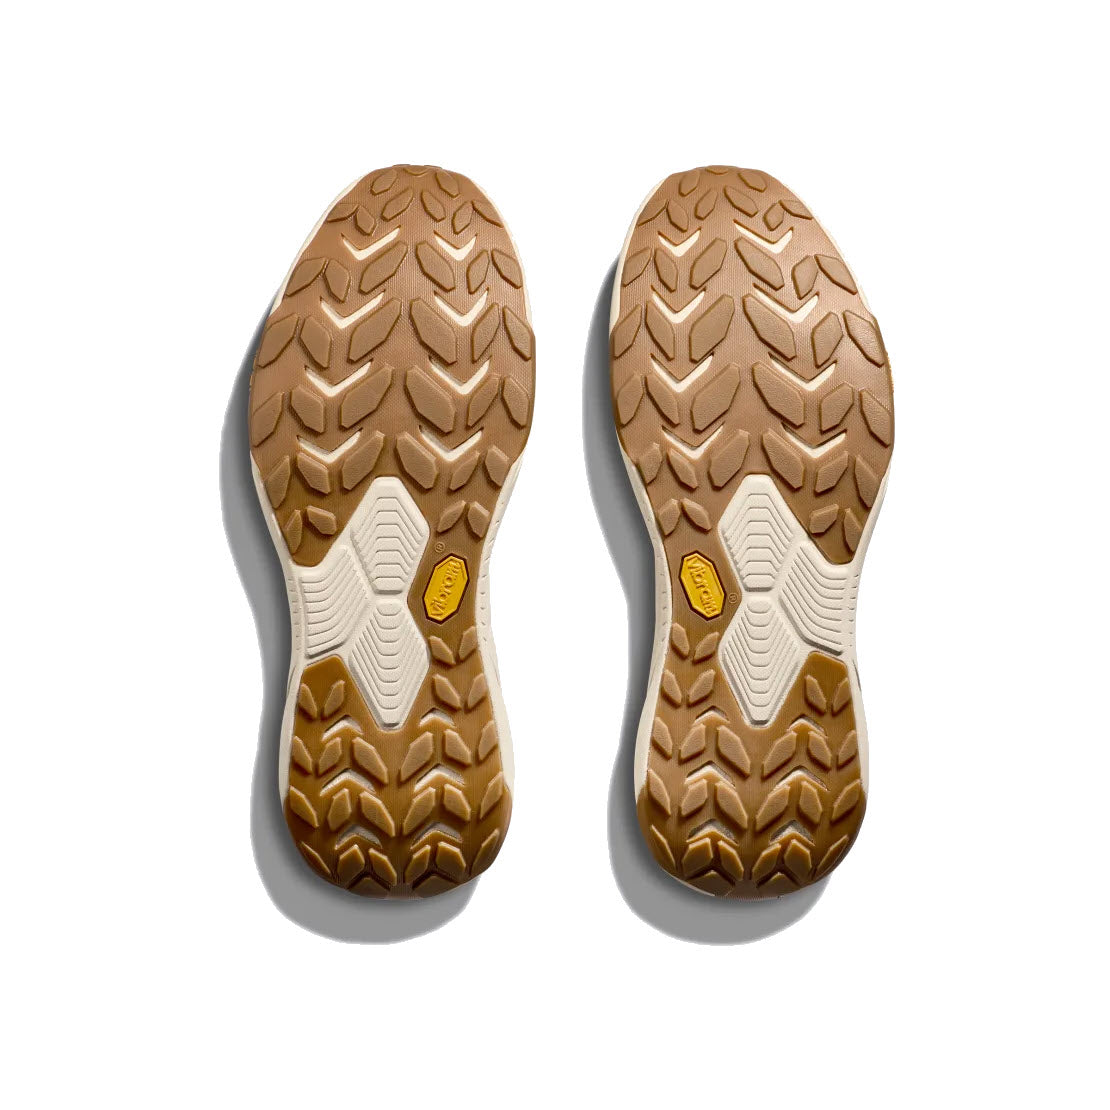 A pair of Hoka shoe soles made from eco-friendly materials, with a brown tread pattern and white and yellow accents, displayed on a white background.